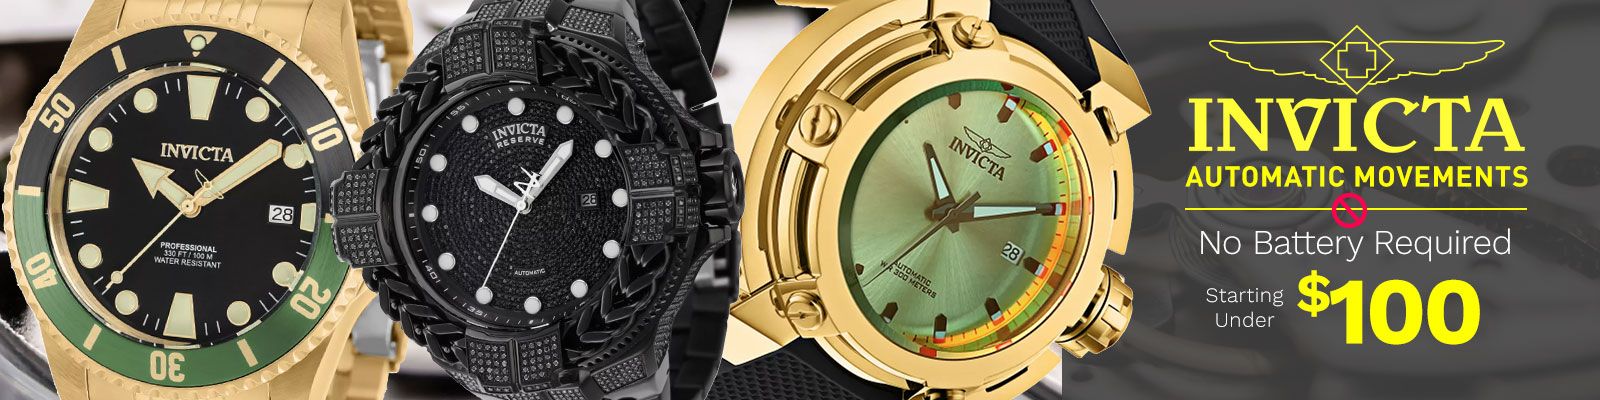 Invicta   Automatic Movements   No Battery Required  Starting Under $100  ft. 659-225 | 925-639 | 928-376 | 923-466